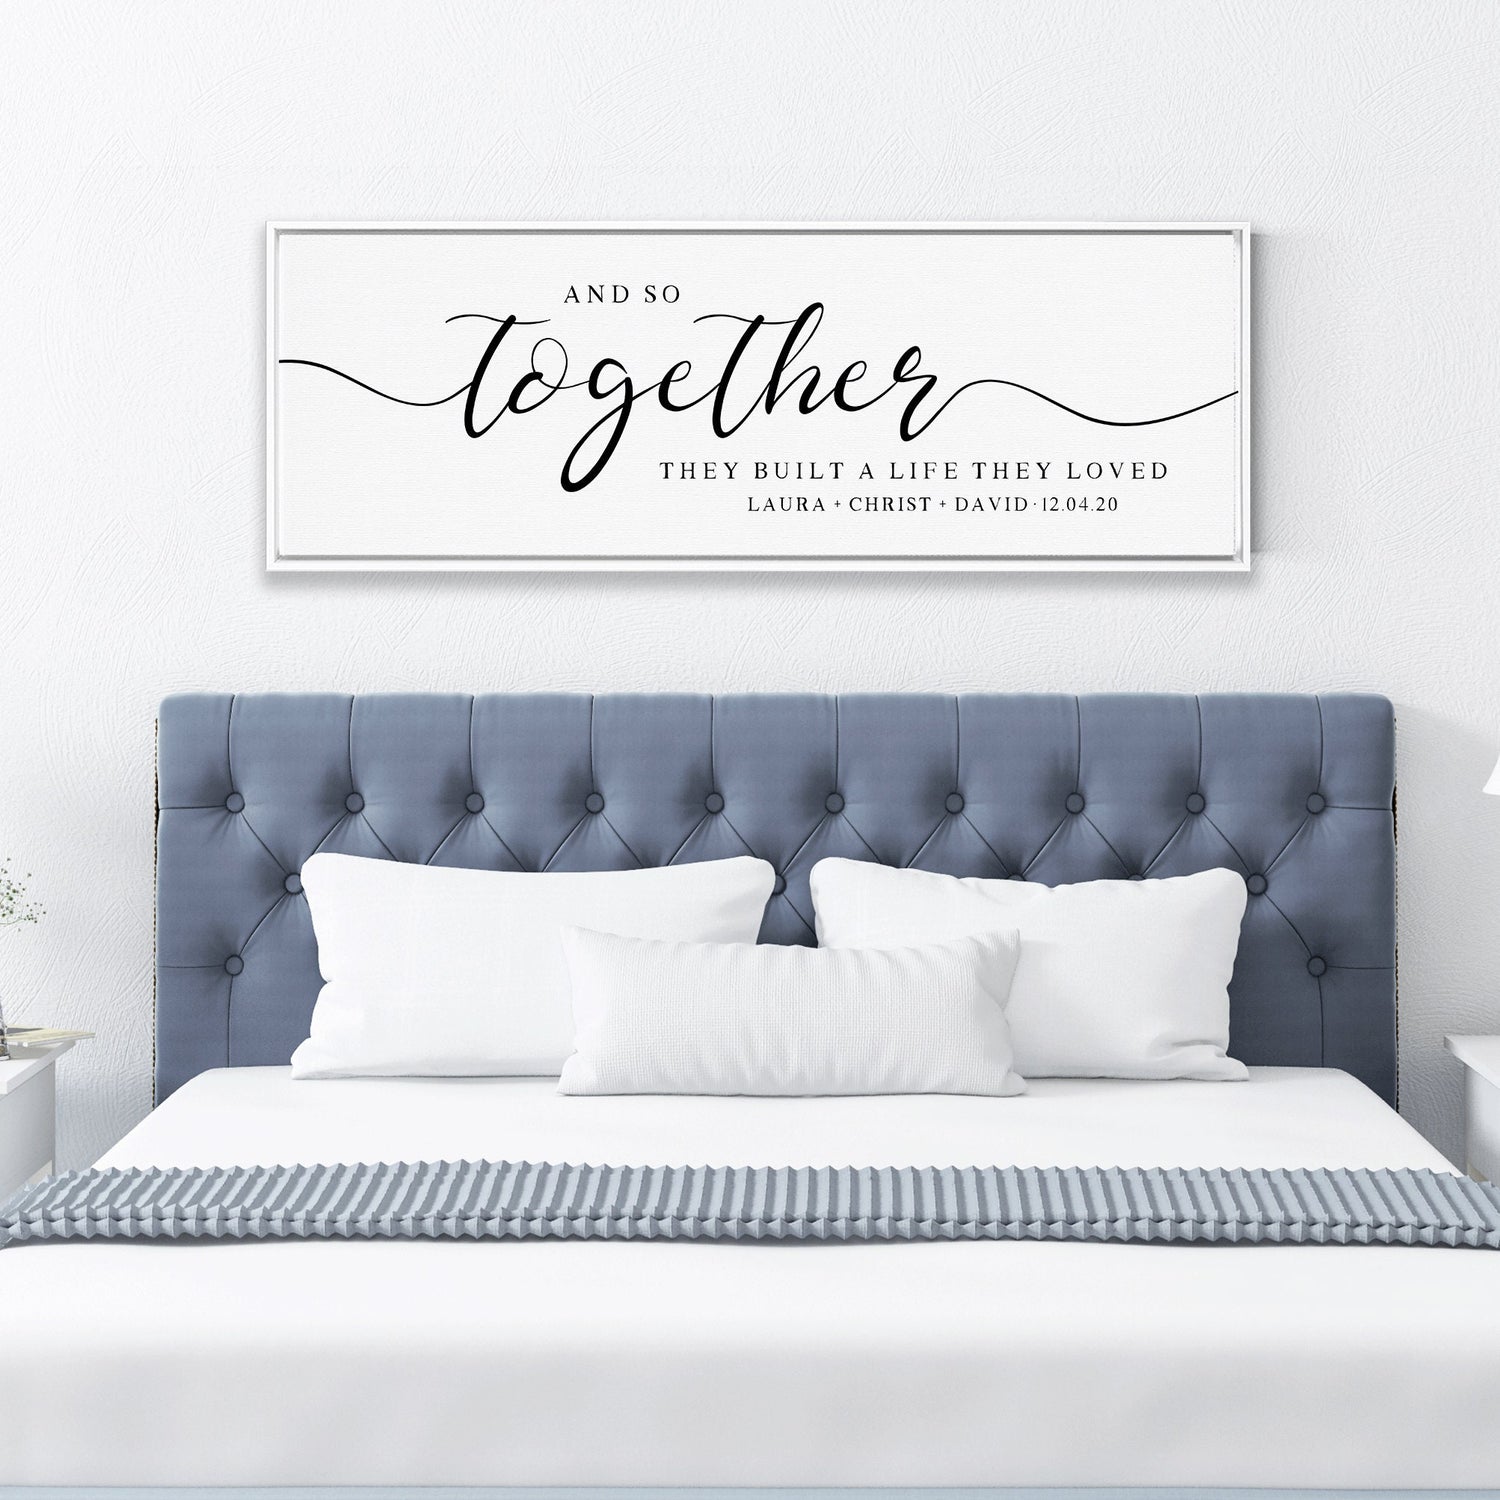 So Together They Built A Life They Loved Sign | Personalize Canvas Wall Art Framed | Master Bedroom Above the Bed Prints | Gifts for Wife